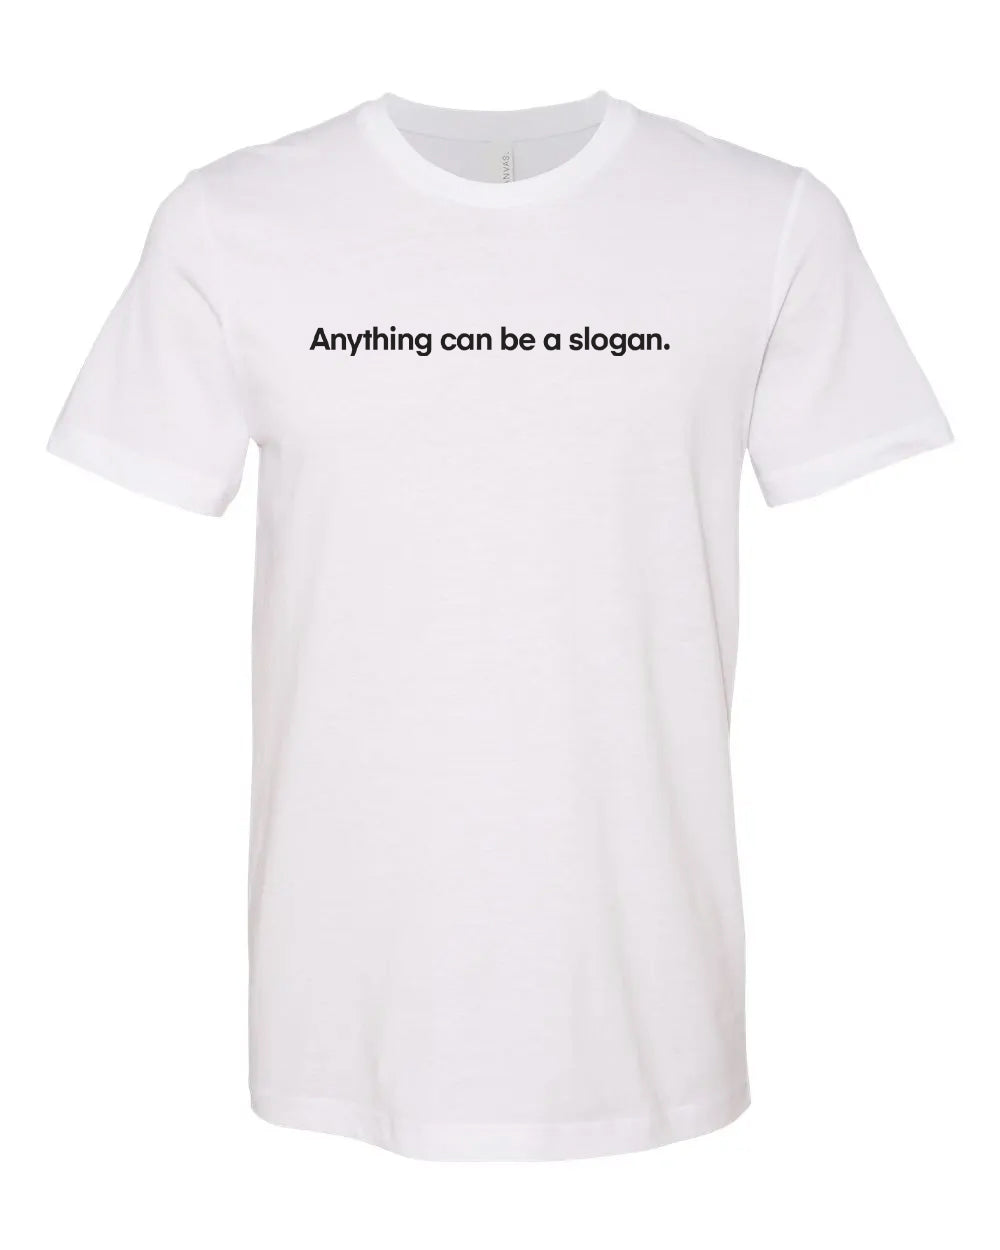 SLOGAN T-Shirts | Unsettled Apparel